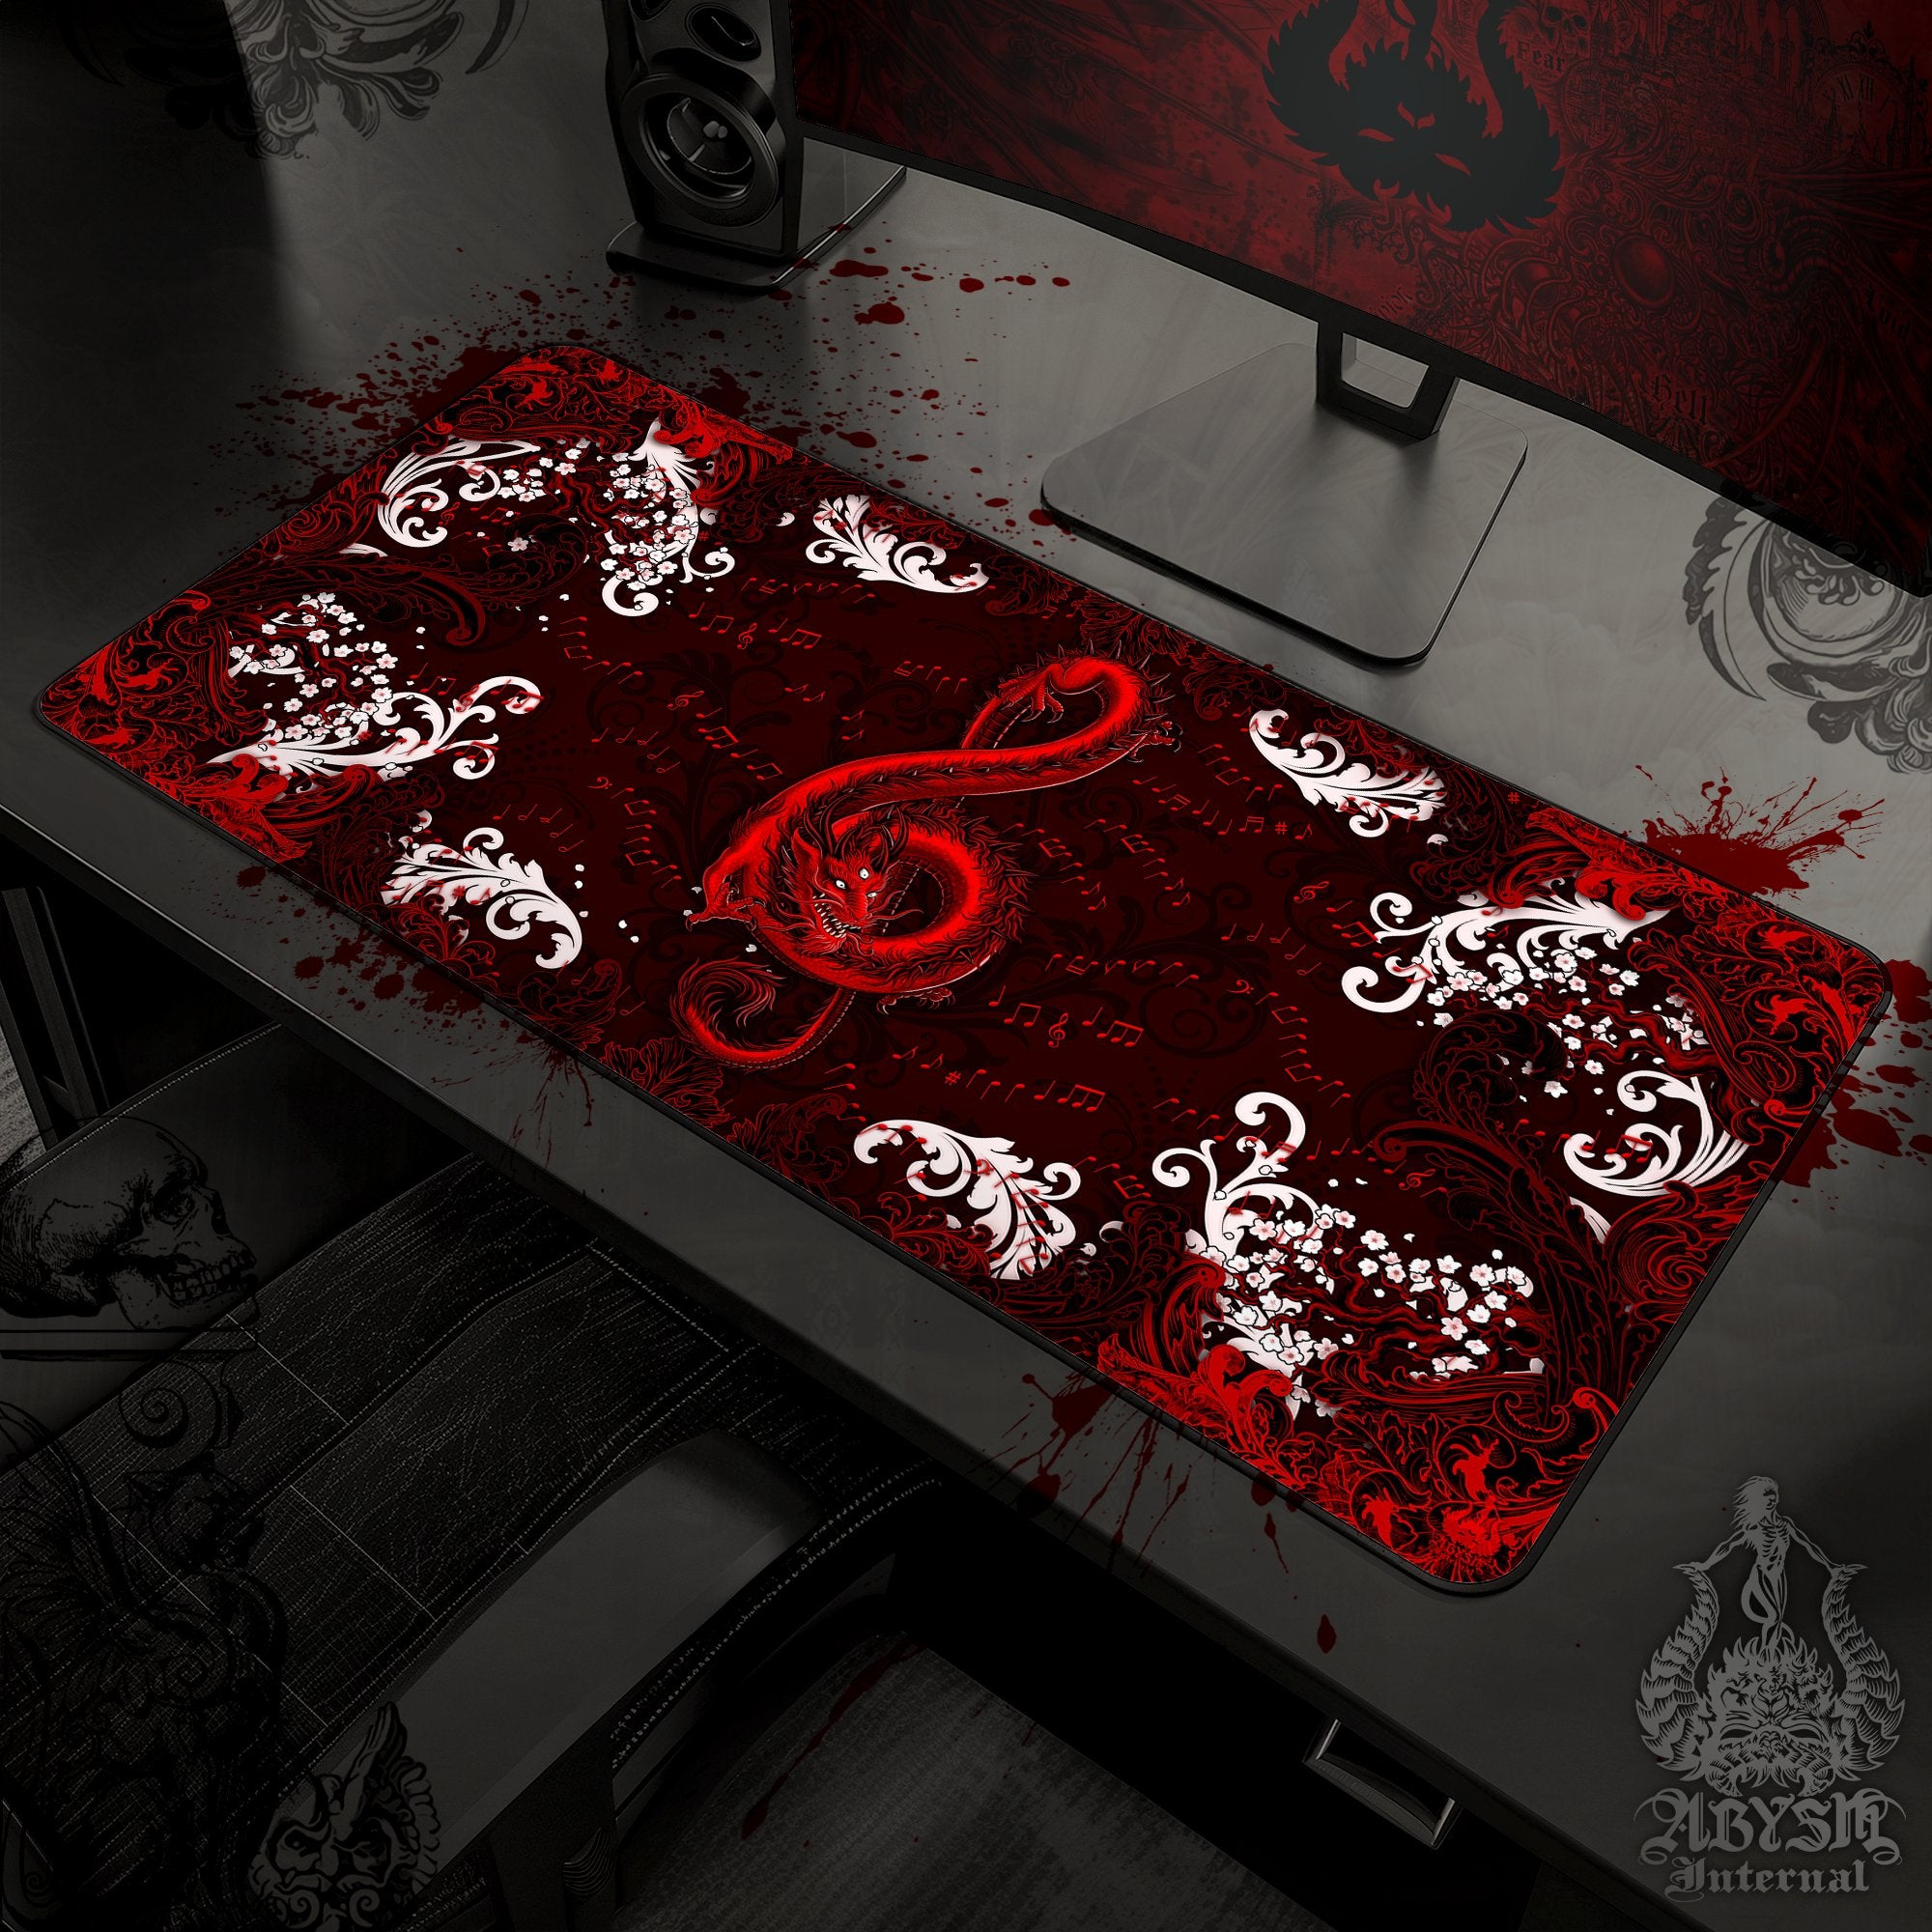 Music Gaming Mouse Pad, Red Dragon Desk Mat, Gothic Table Protector Cover, Bloody Black Workpad, Treble Clef Art Print - Abysm Internal